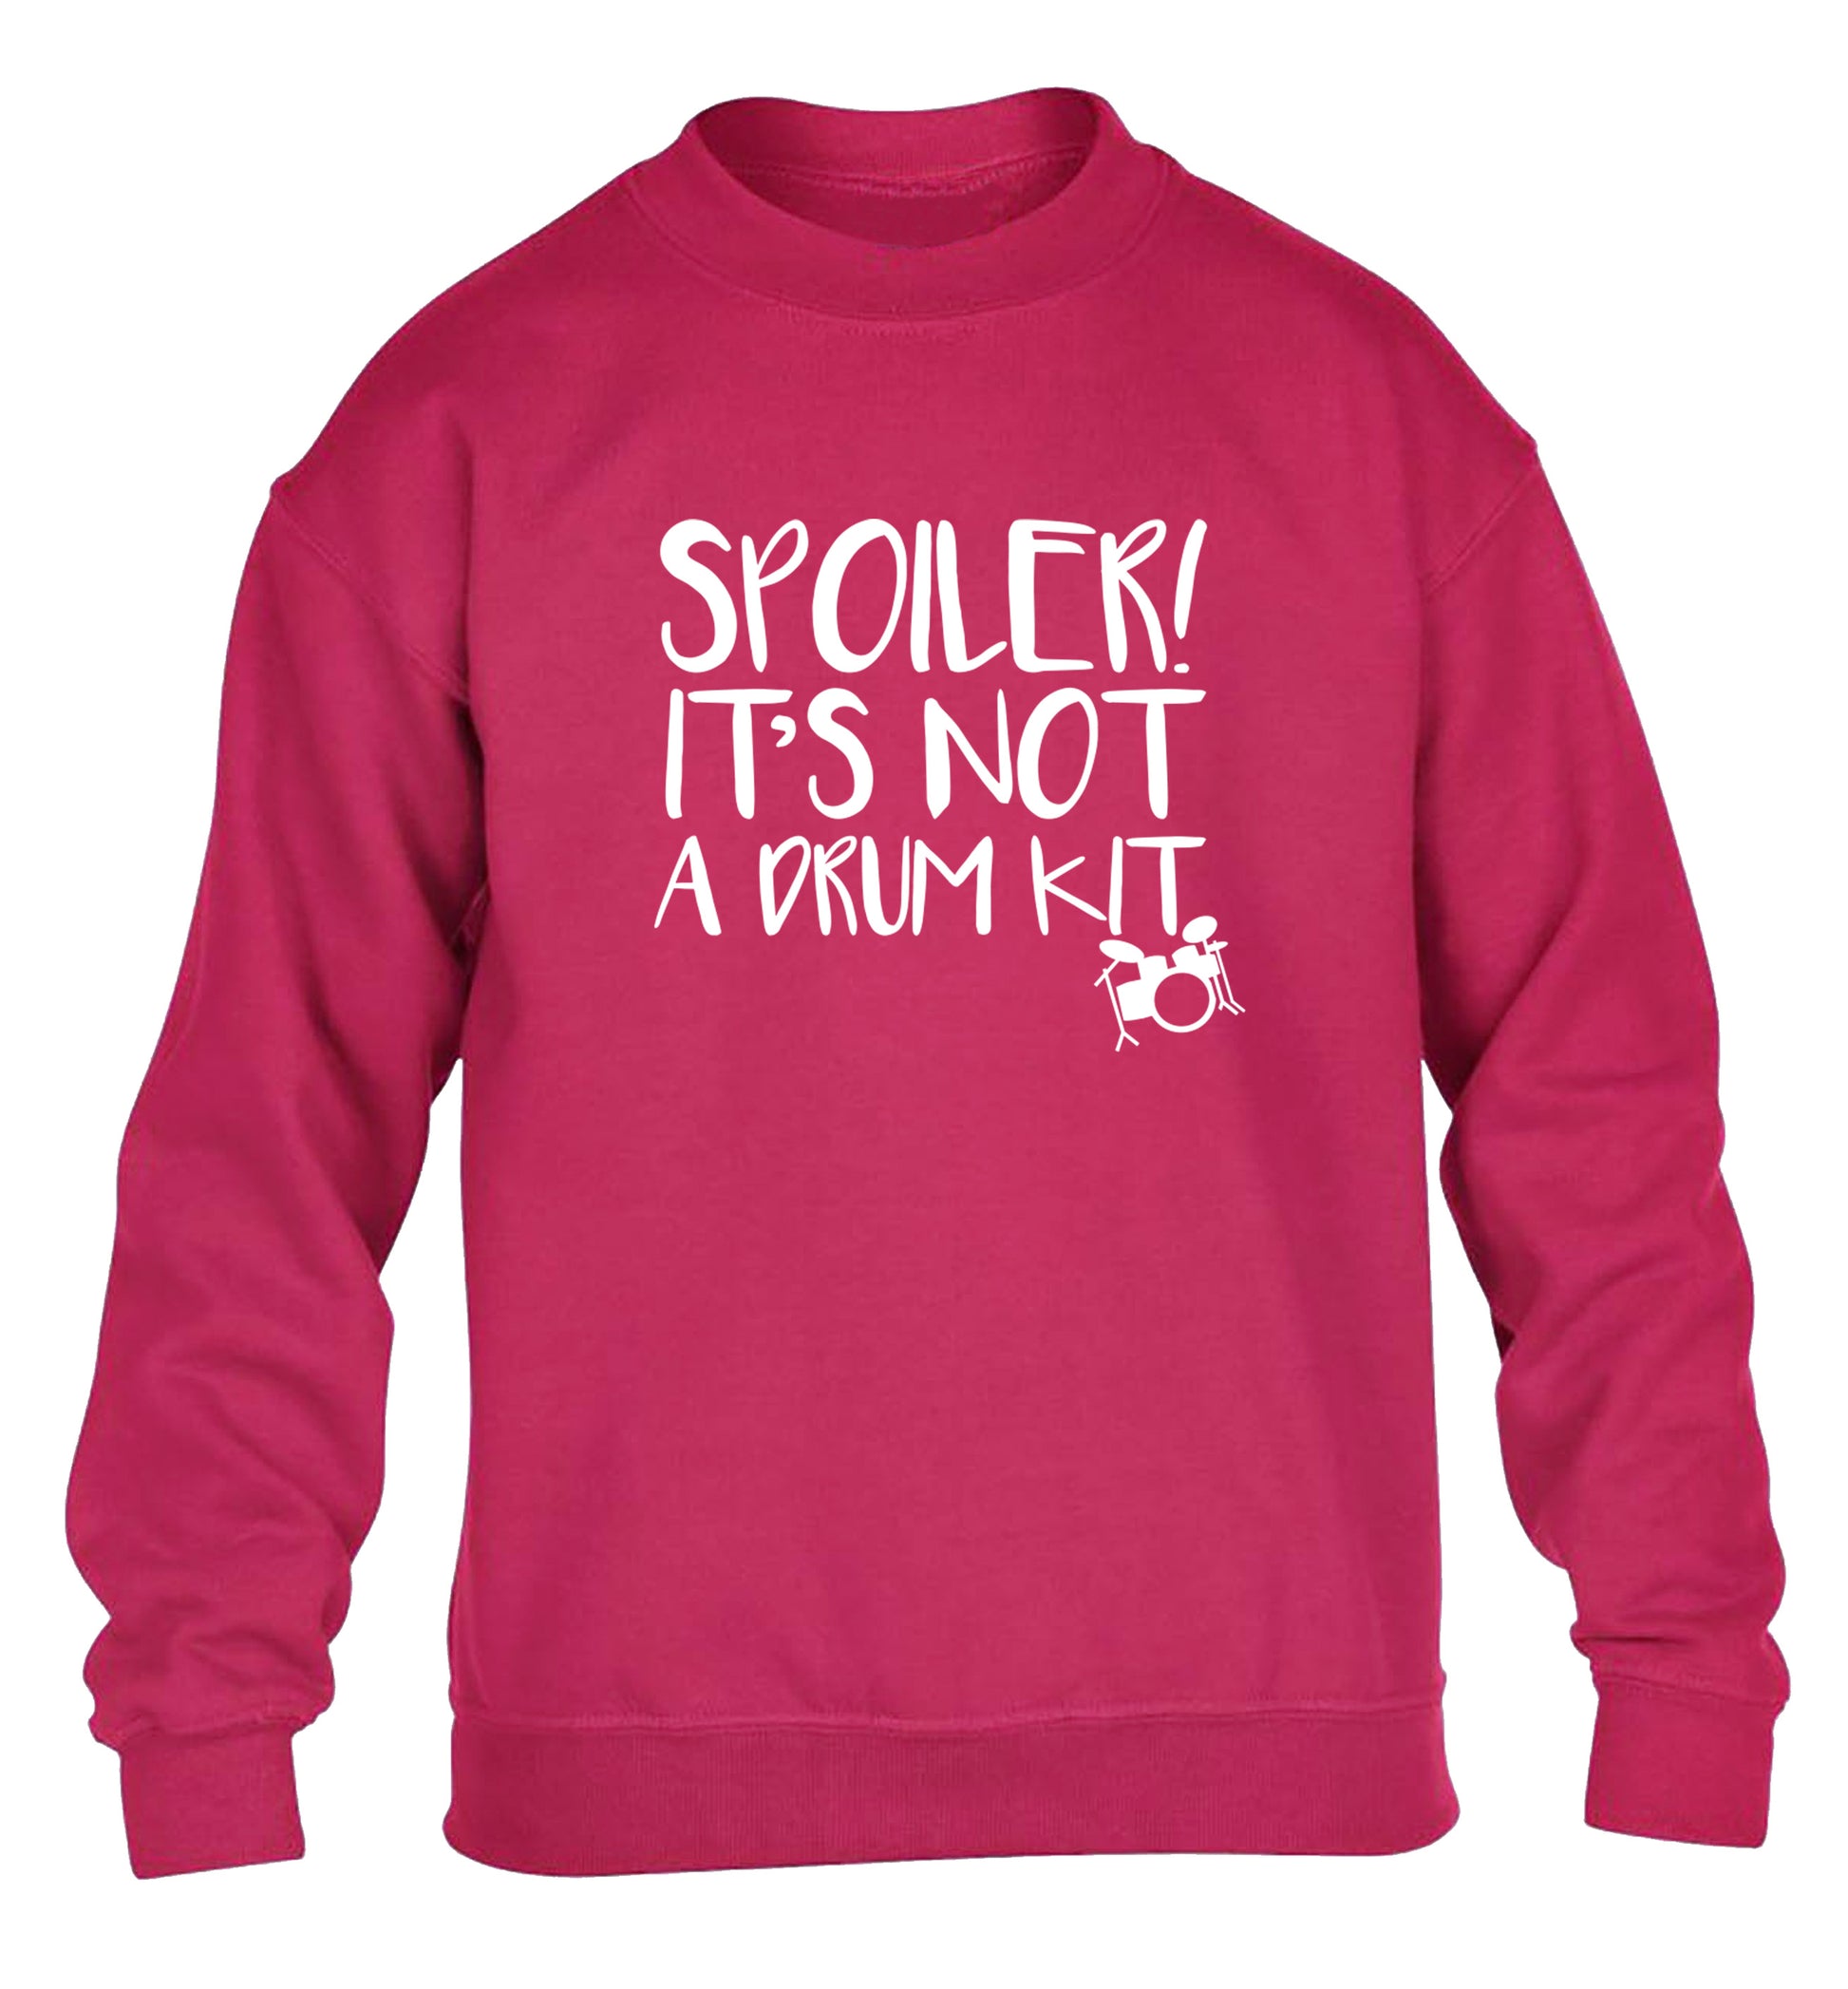 Spoiler it's not a drum kit children's pink sweater 12-13 Years